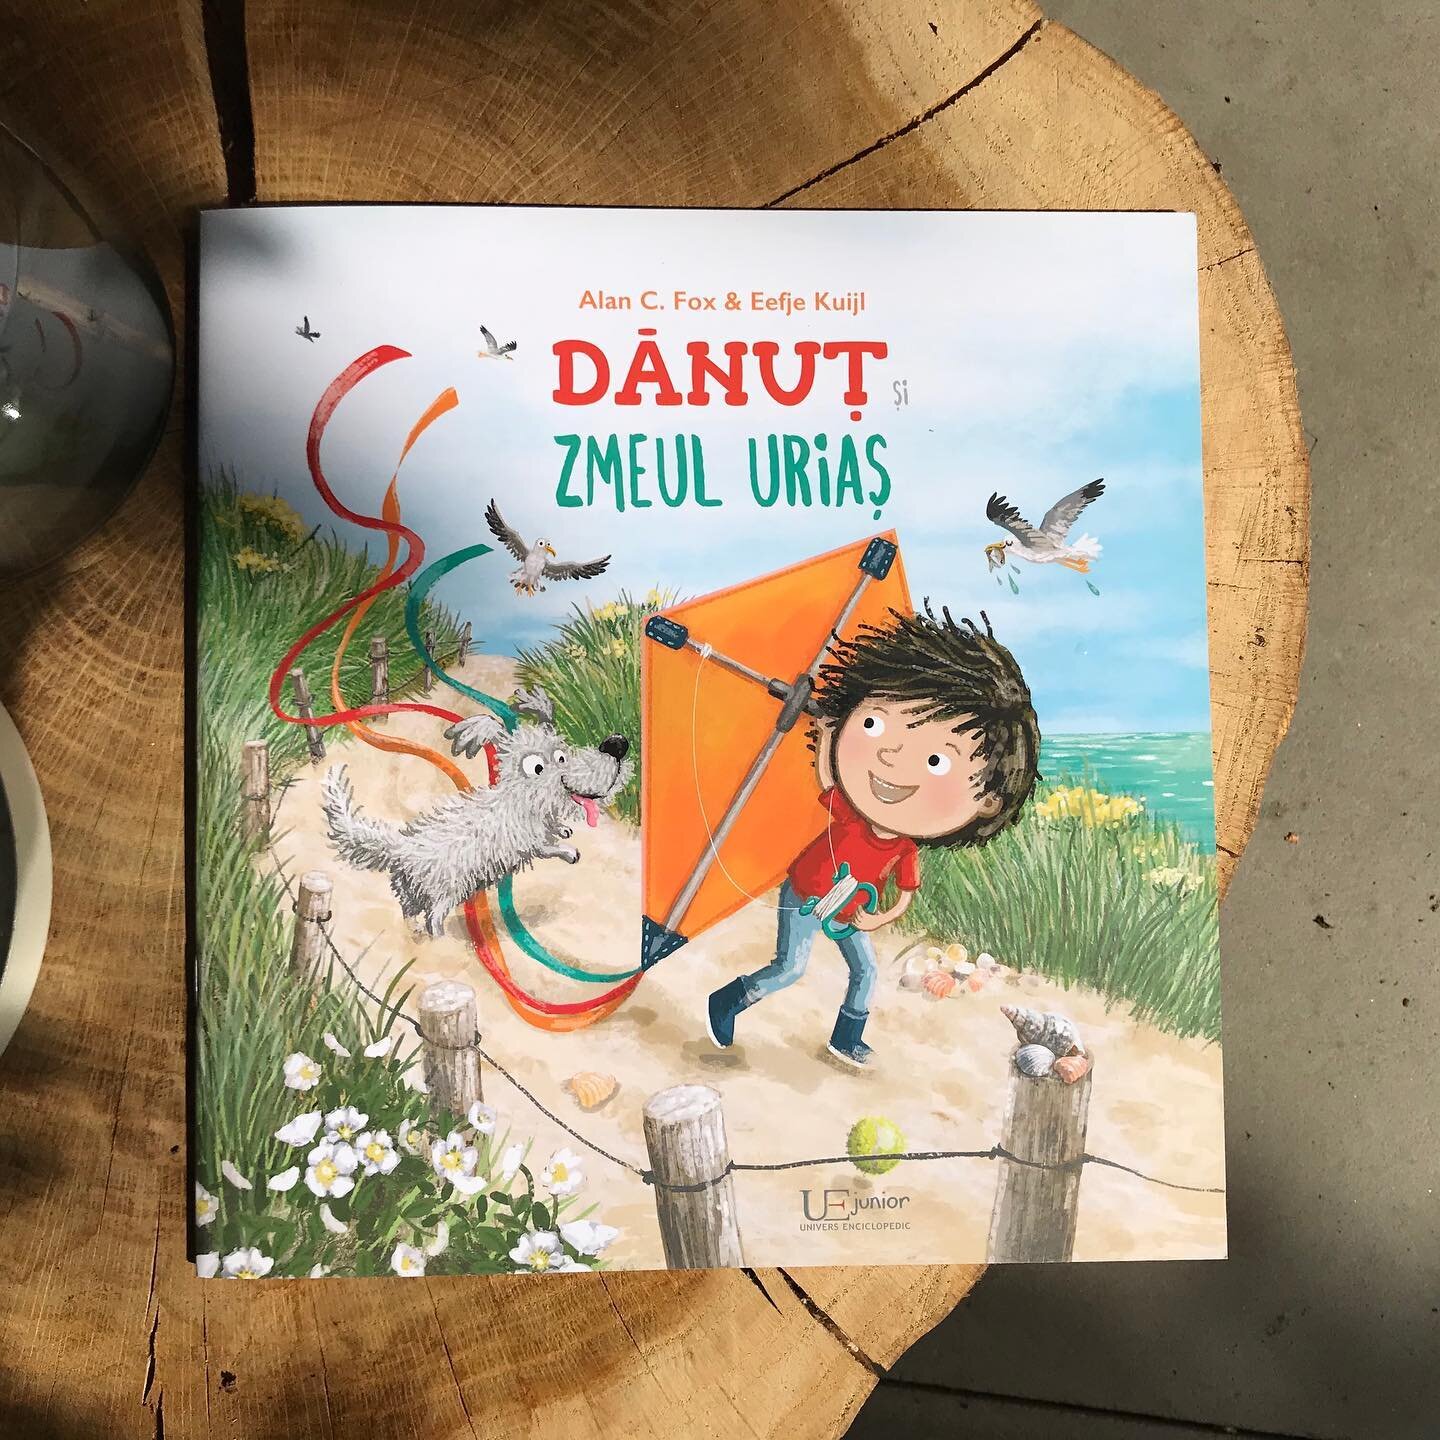 5th co-edition. Benji &amp; the giant kite, now available in Romanian too! 

#childrensbook #picturebook #kite #beach #summer #wind #illustratorsoninstagram  #illustrations @clavispublishing @therealalanfox